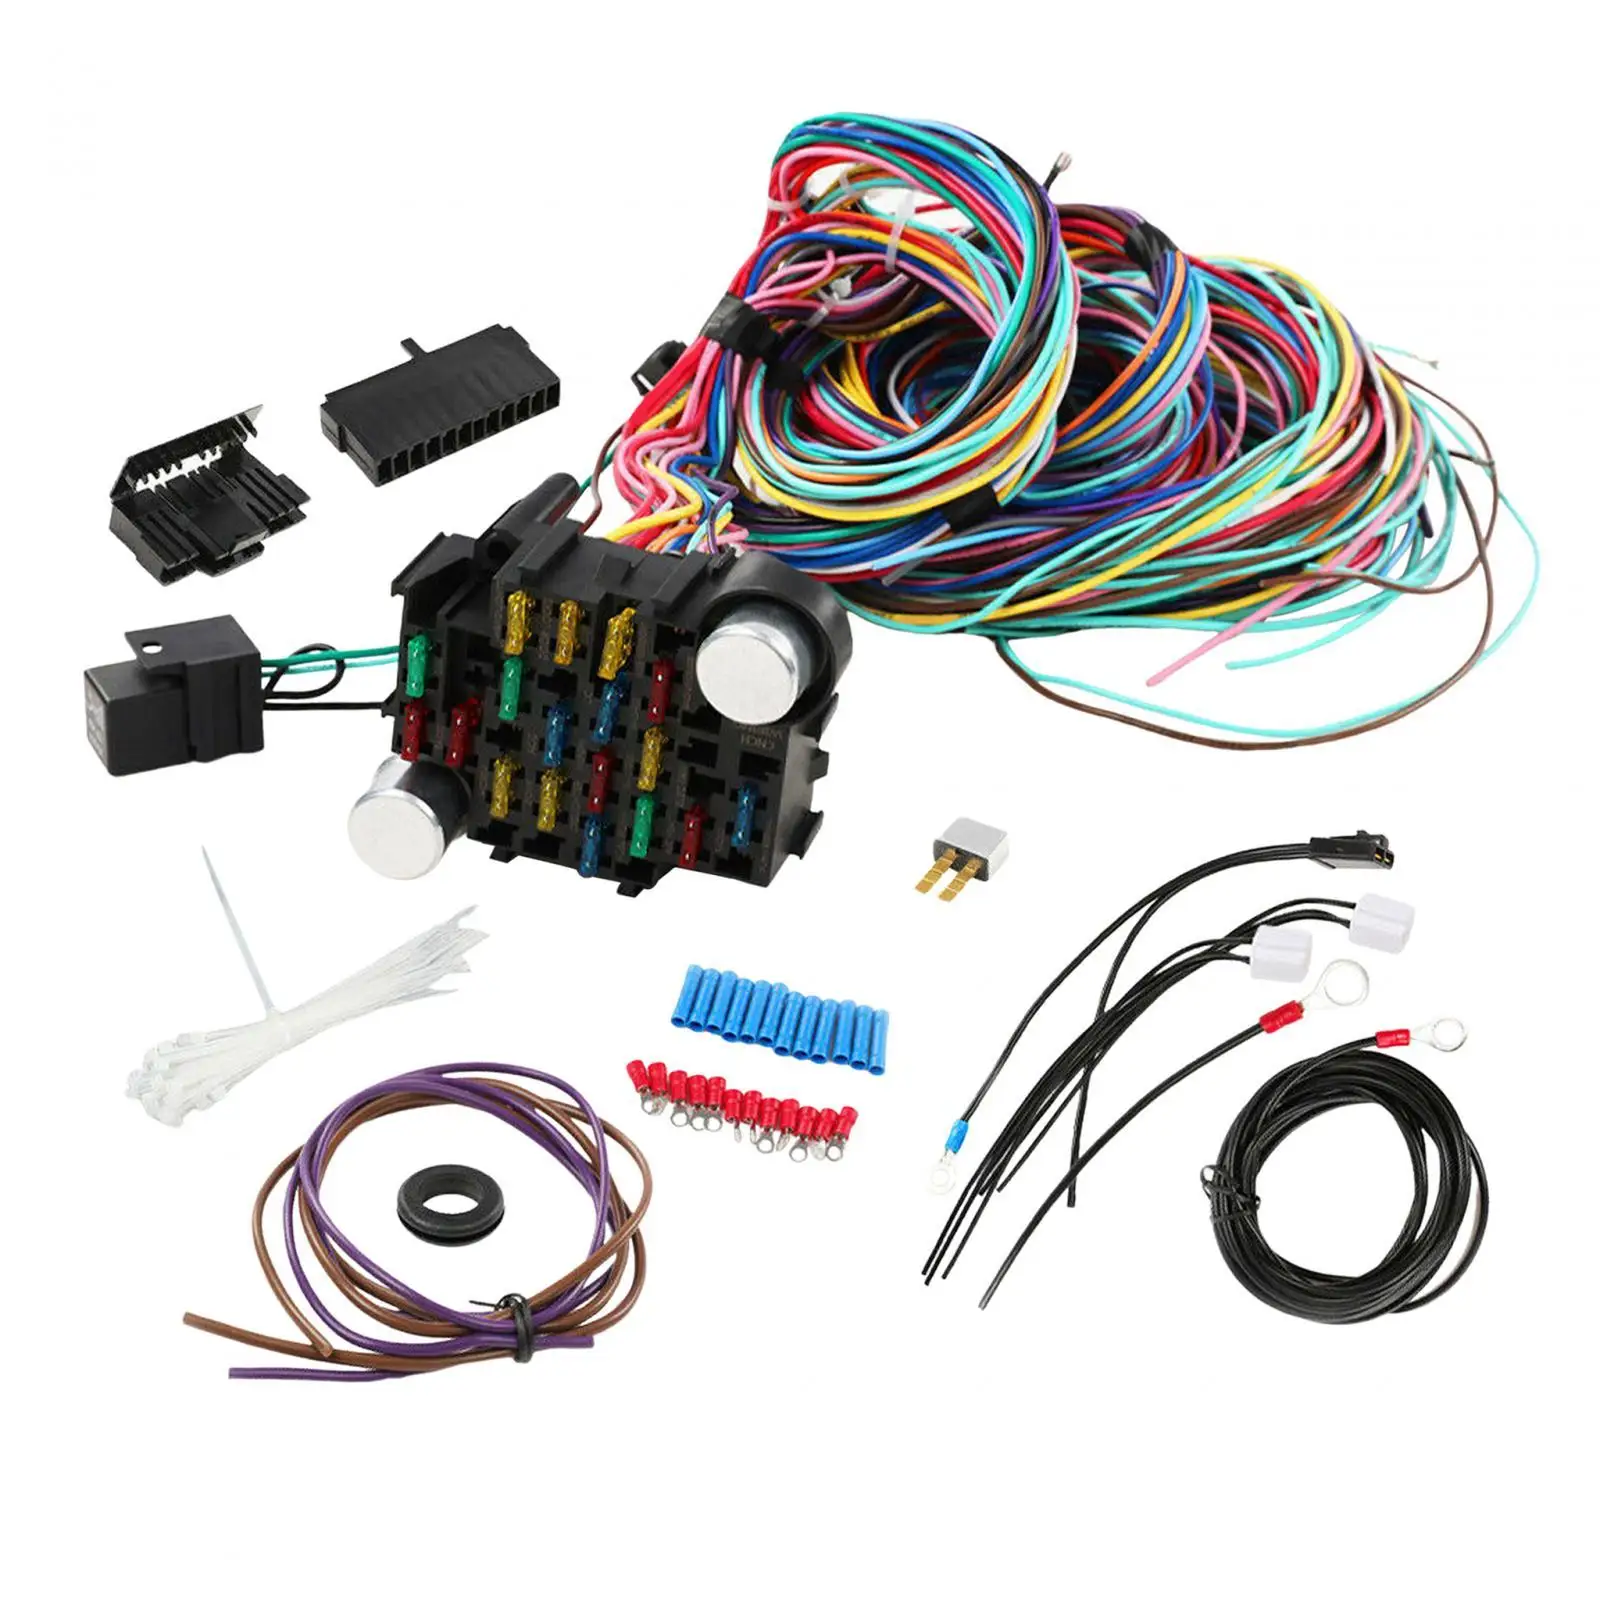 Universal Wiring Harness Kit Parts Extra Long Wires Stable Performance Direct Replaces 21 Circuit Wiring Harness for Car